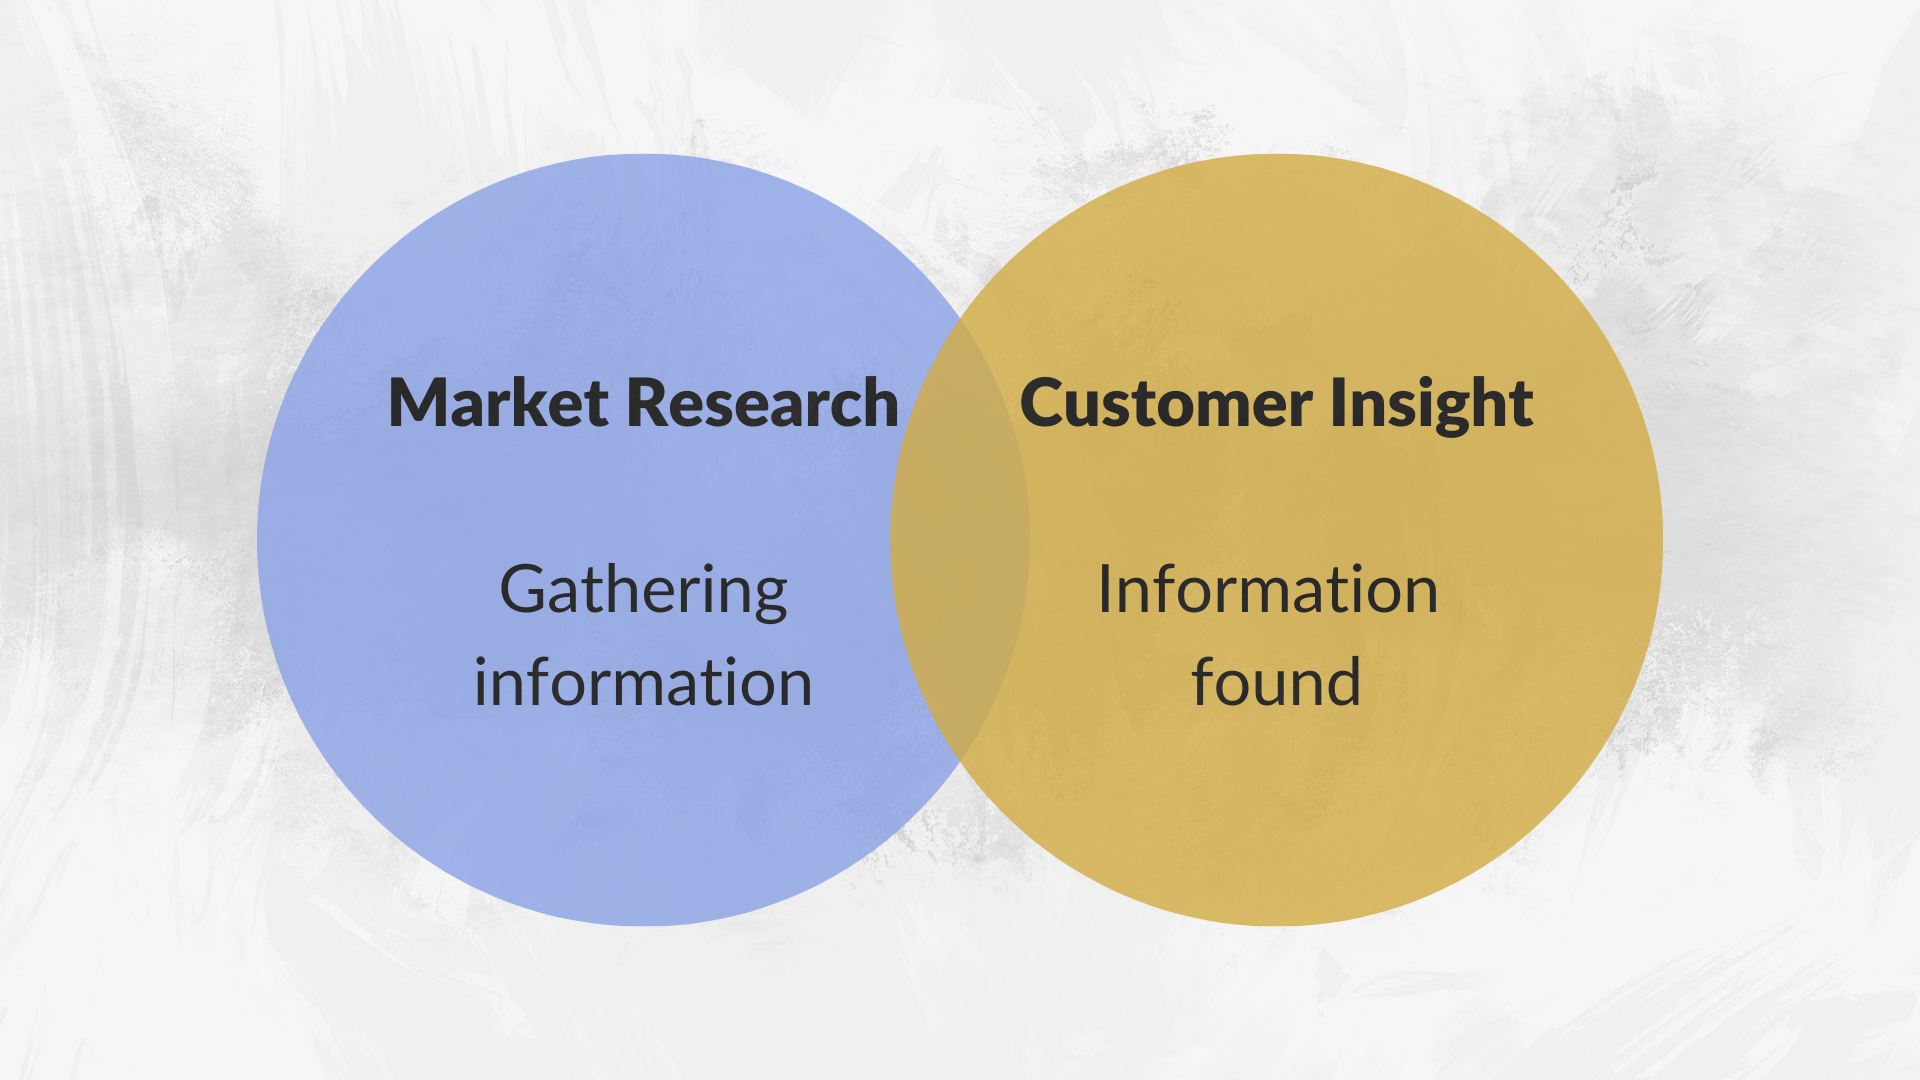 Where do market research and customer insights meet?